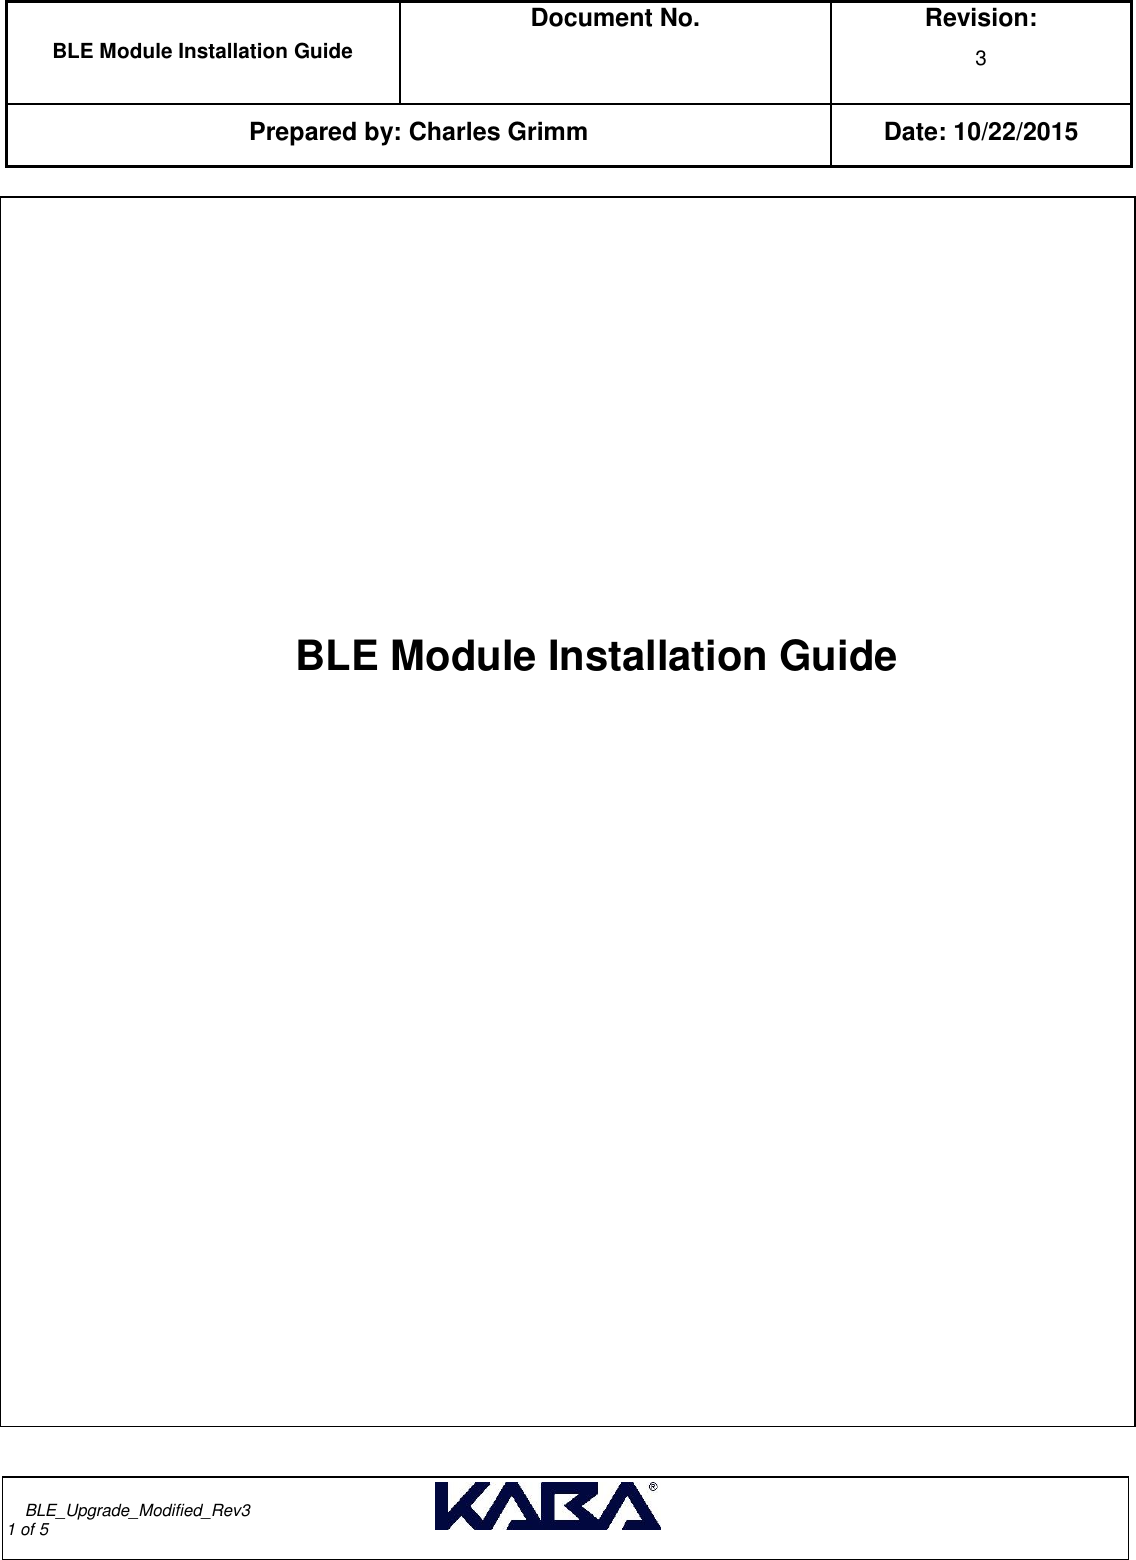  BLE Module Installation Guide  Document No.  Revision: 3   Prepared by: Charles Grimm Date: 10/22/2015         BLE_Upgrade_Modified_Rev3                                                                                                                                                                                      1 of 5                 BLE Module Installation Guide                       